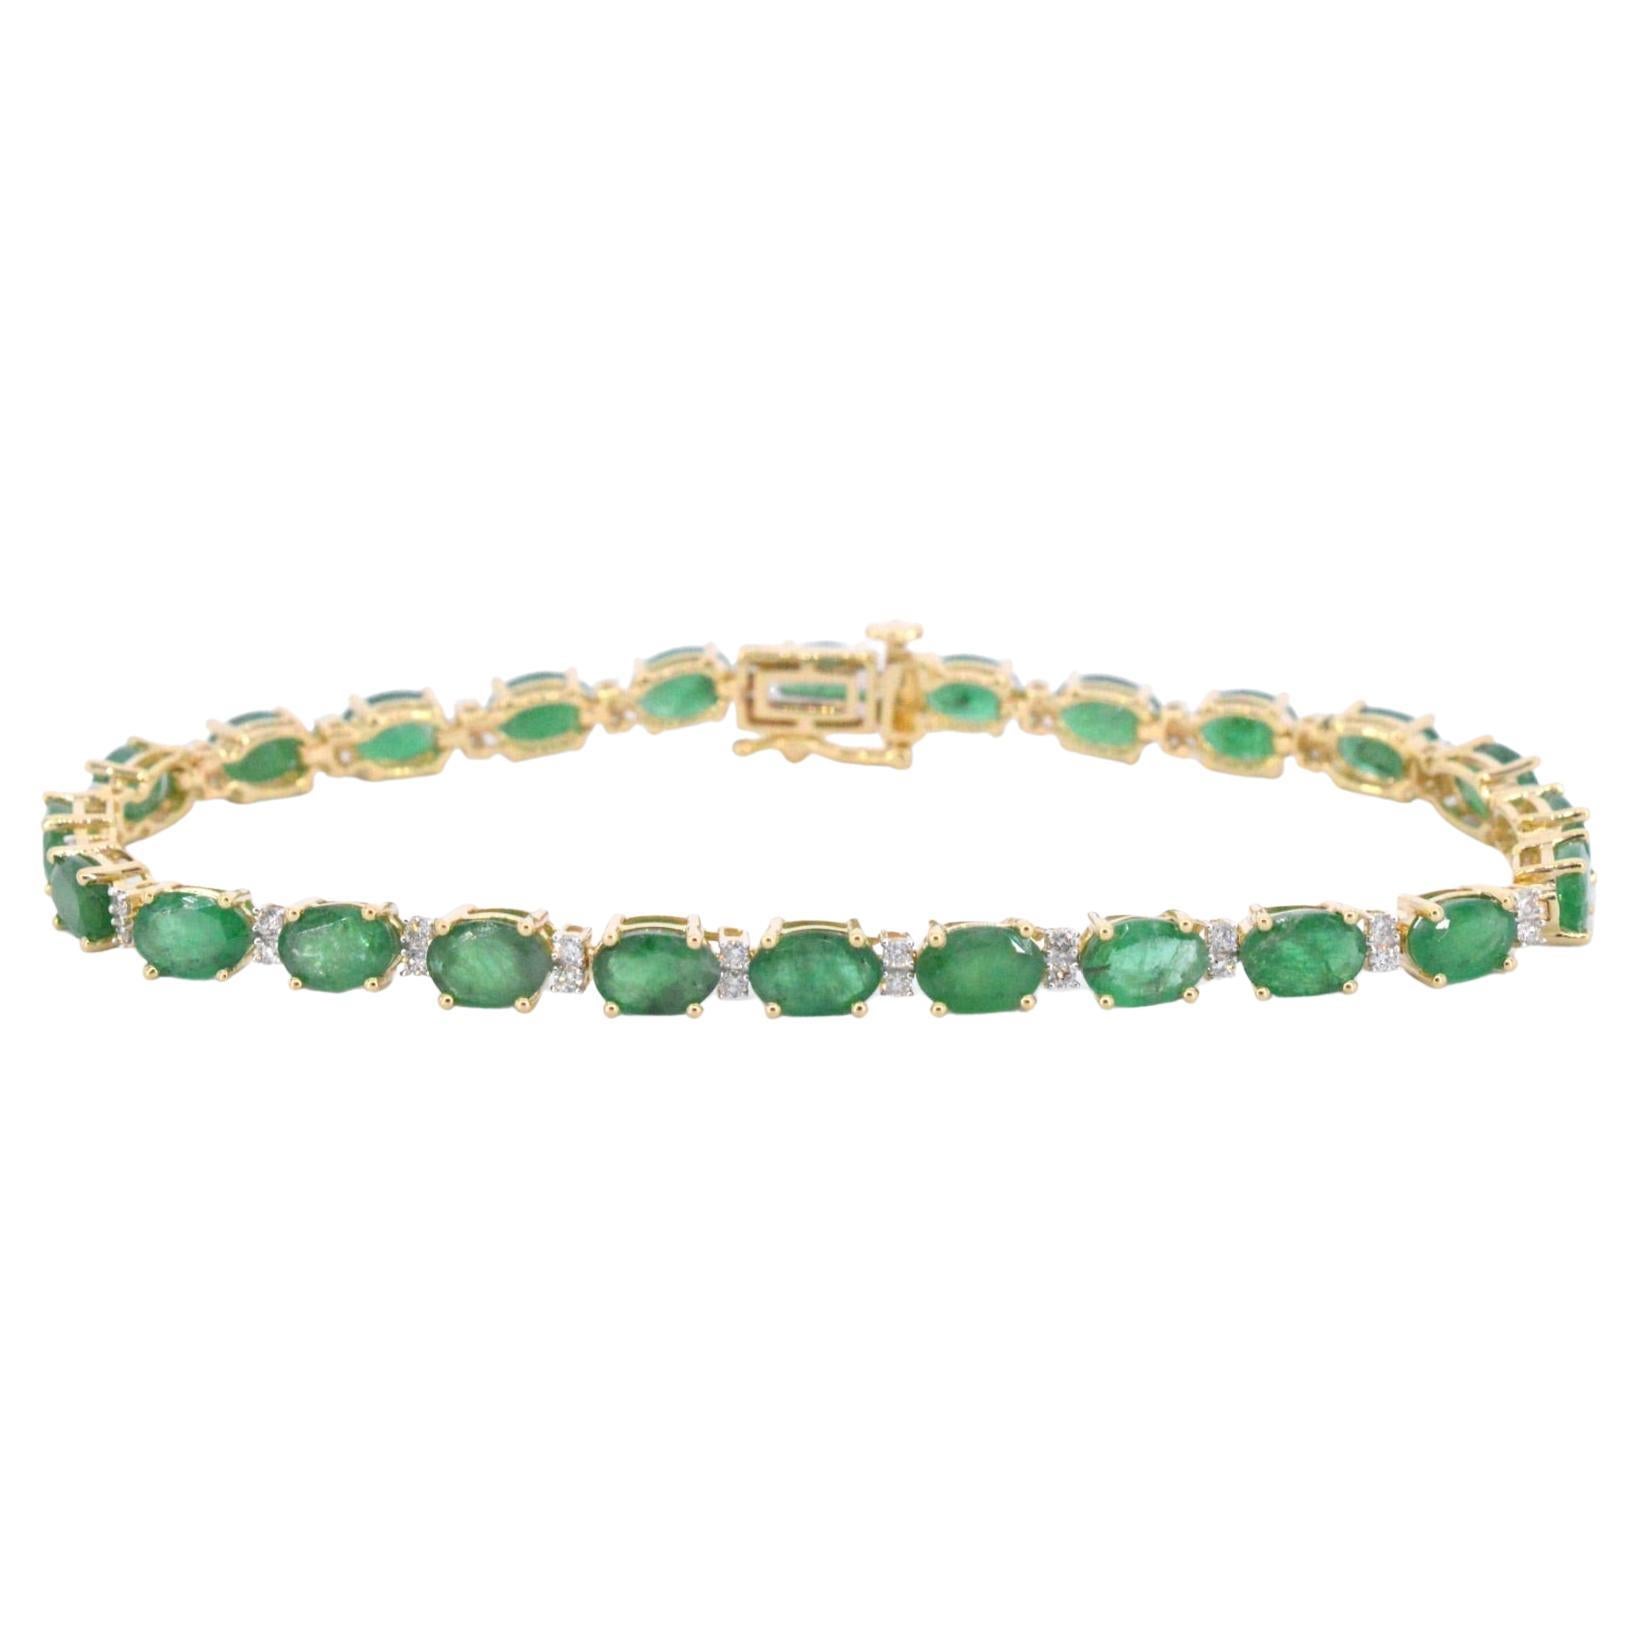 Yellow Gold Tennis Bracelet with Diamonds and Emerald